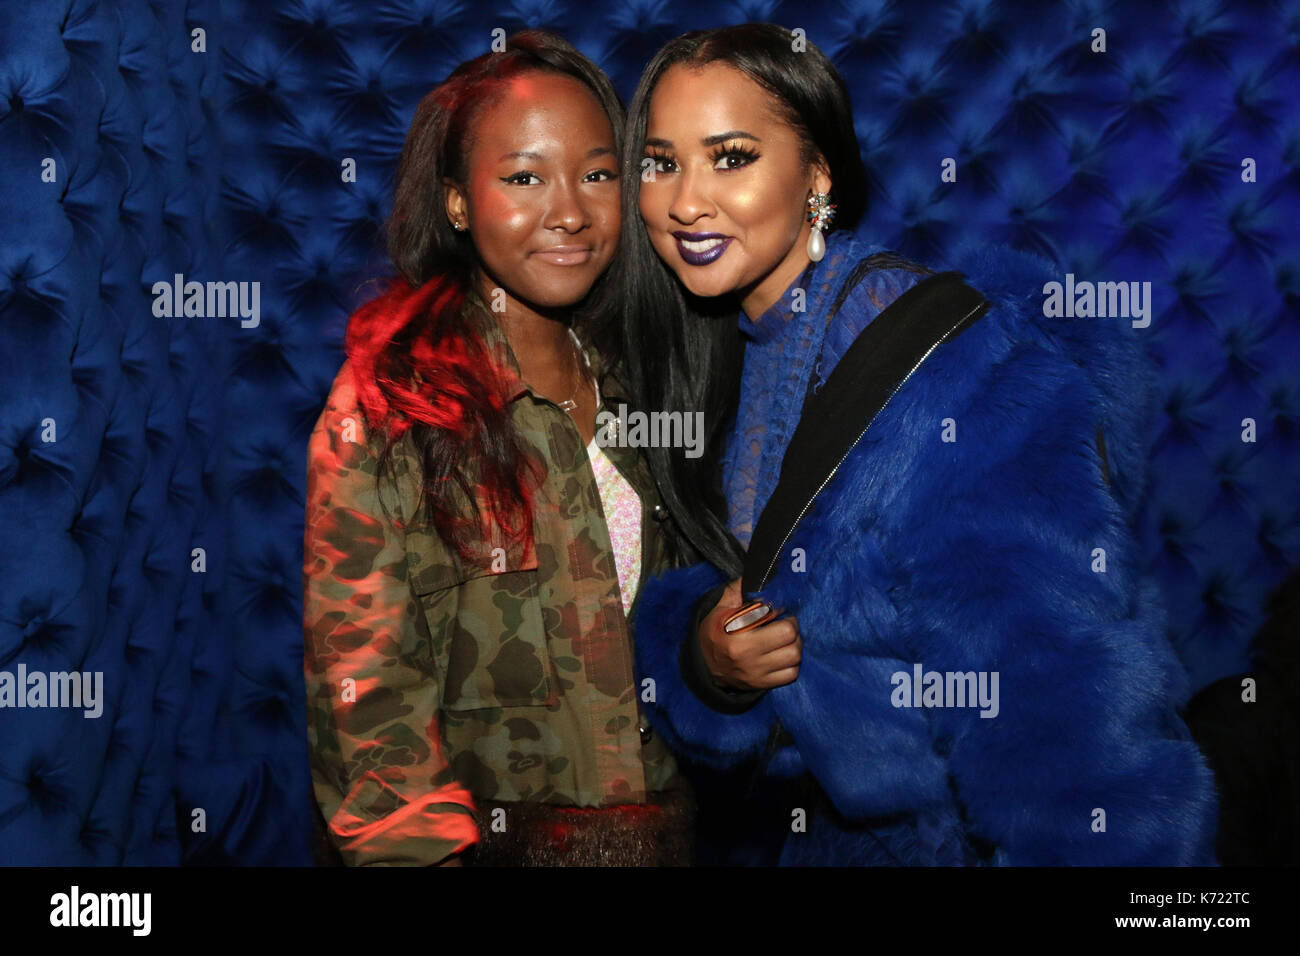 New York, NY, USA. 13th Sep, 2017. Donshea Hopkins and Tammy Rivera at Galore and Juicy Couture's NYFW Ball at Public Arts in New York City on September 13, 2017. Credit: Walik Goshorn/Media Punch/Alamy Live News Stock Photo